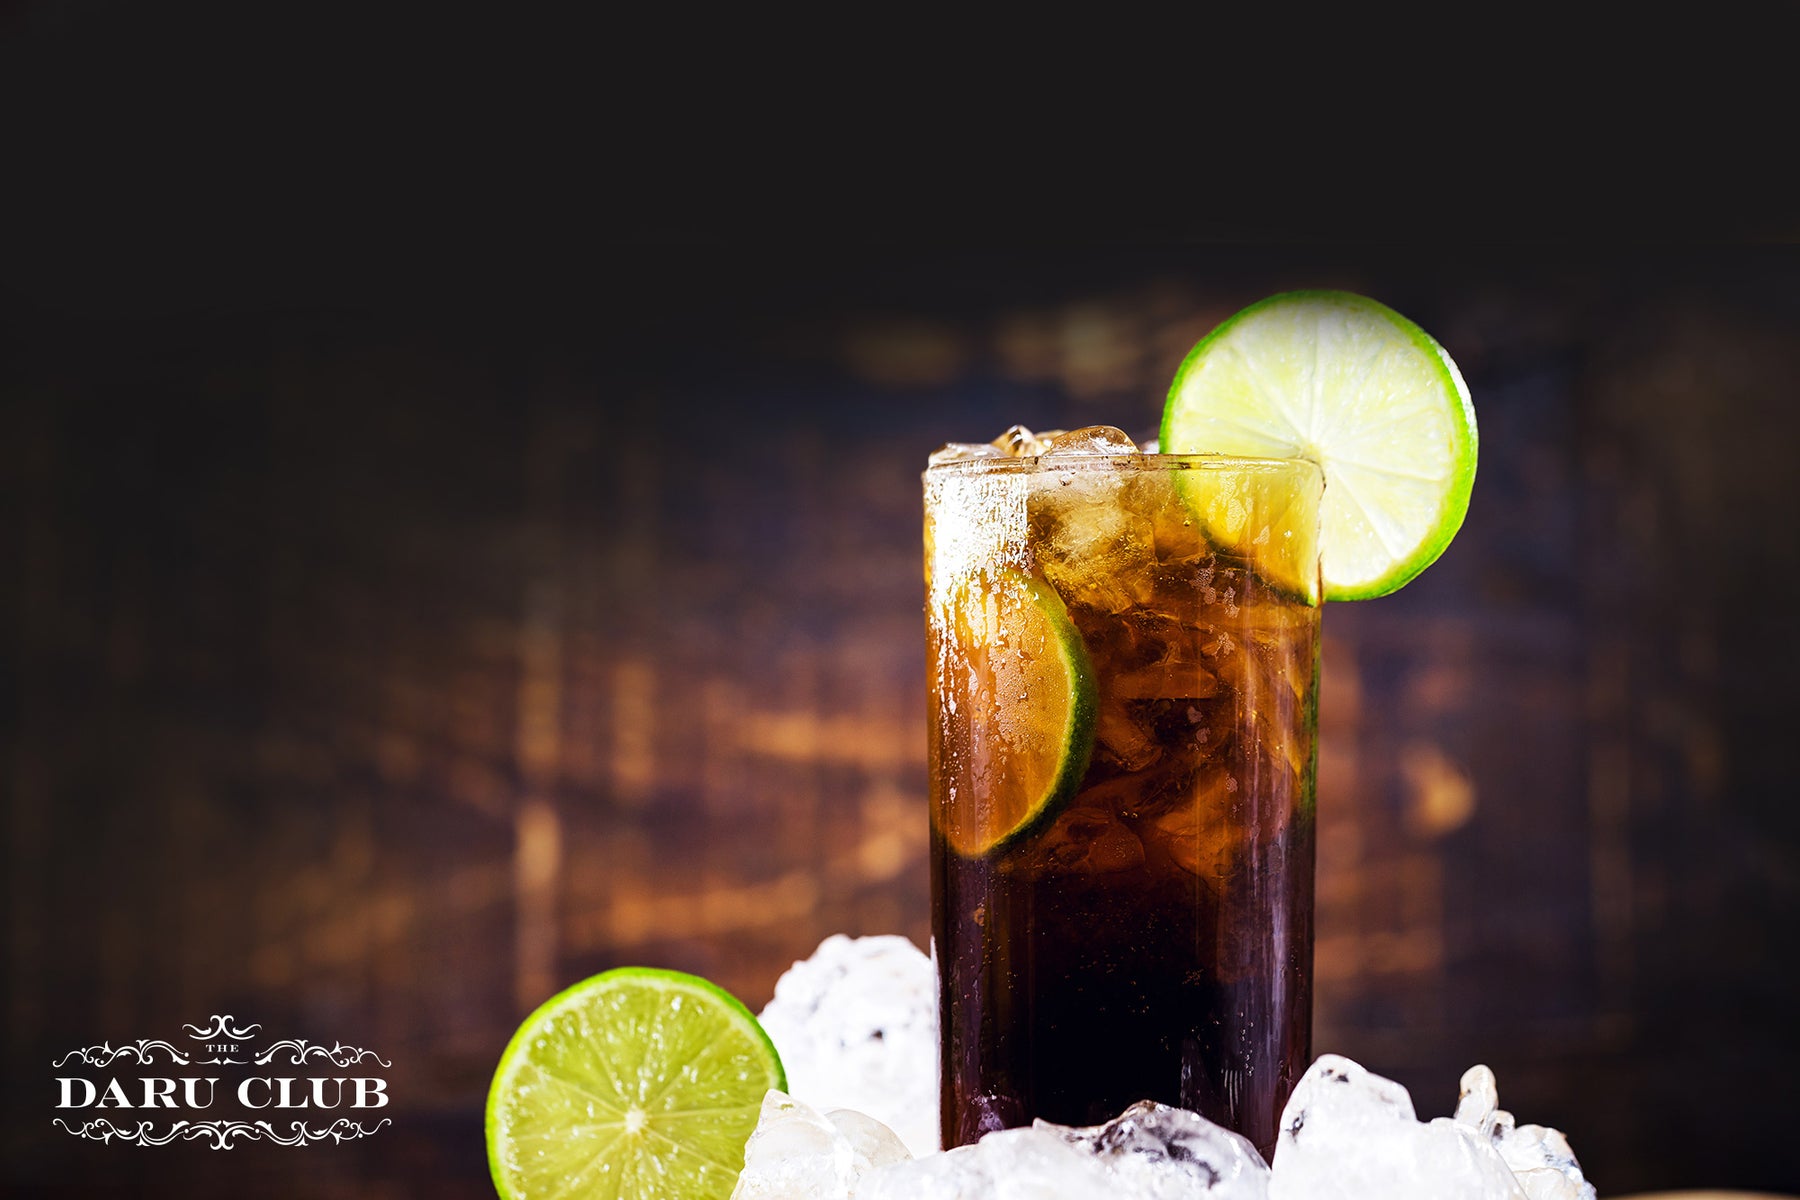 Have you tried the national drink of Cuba- the Cuba Libre?